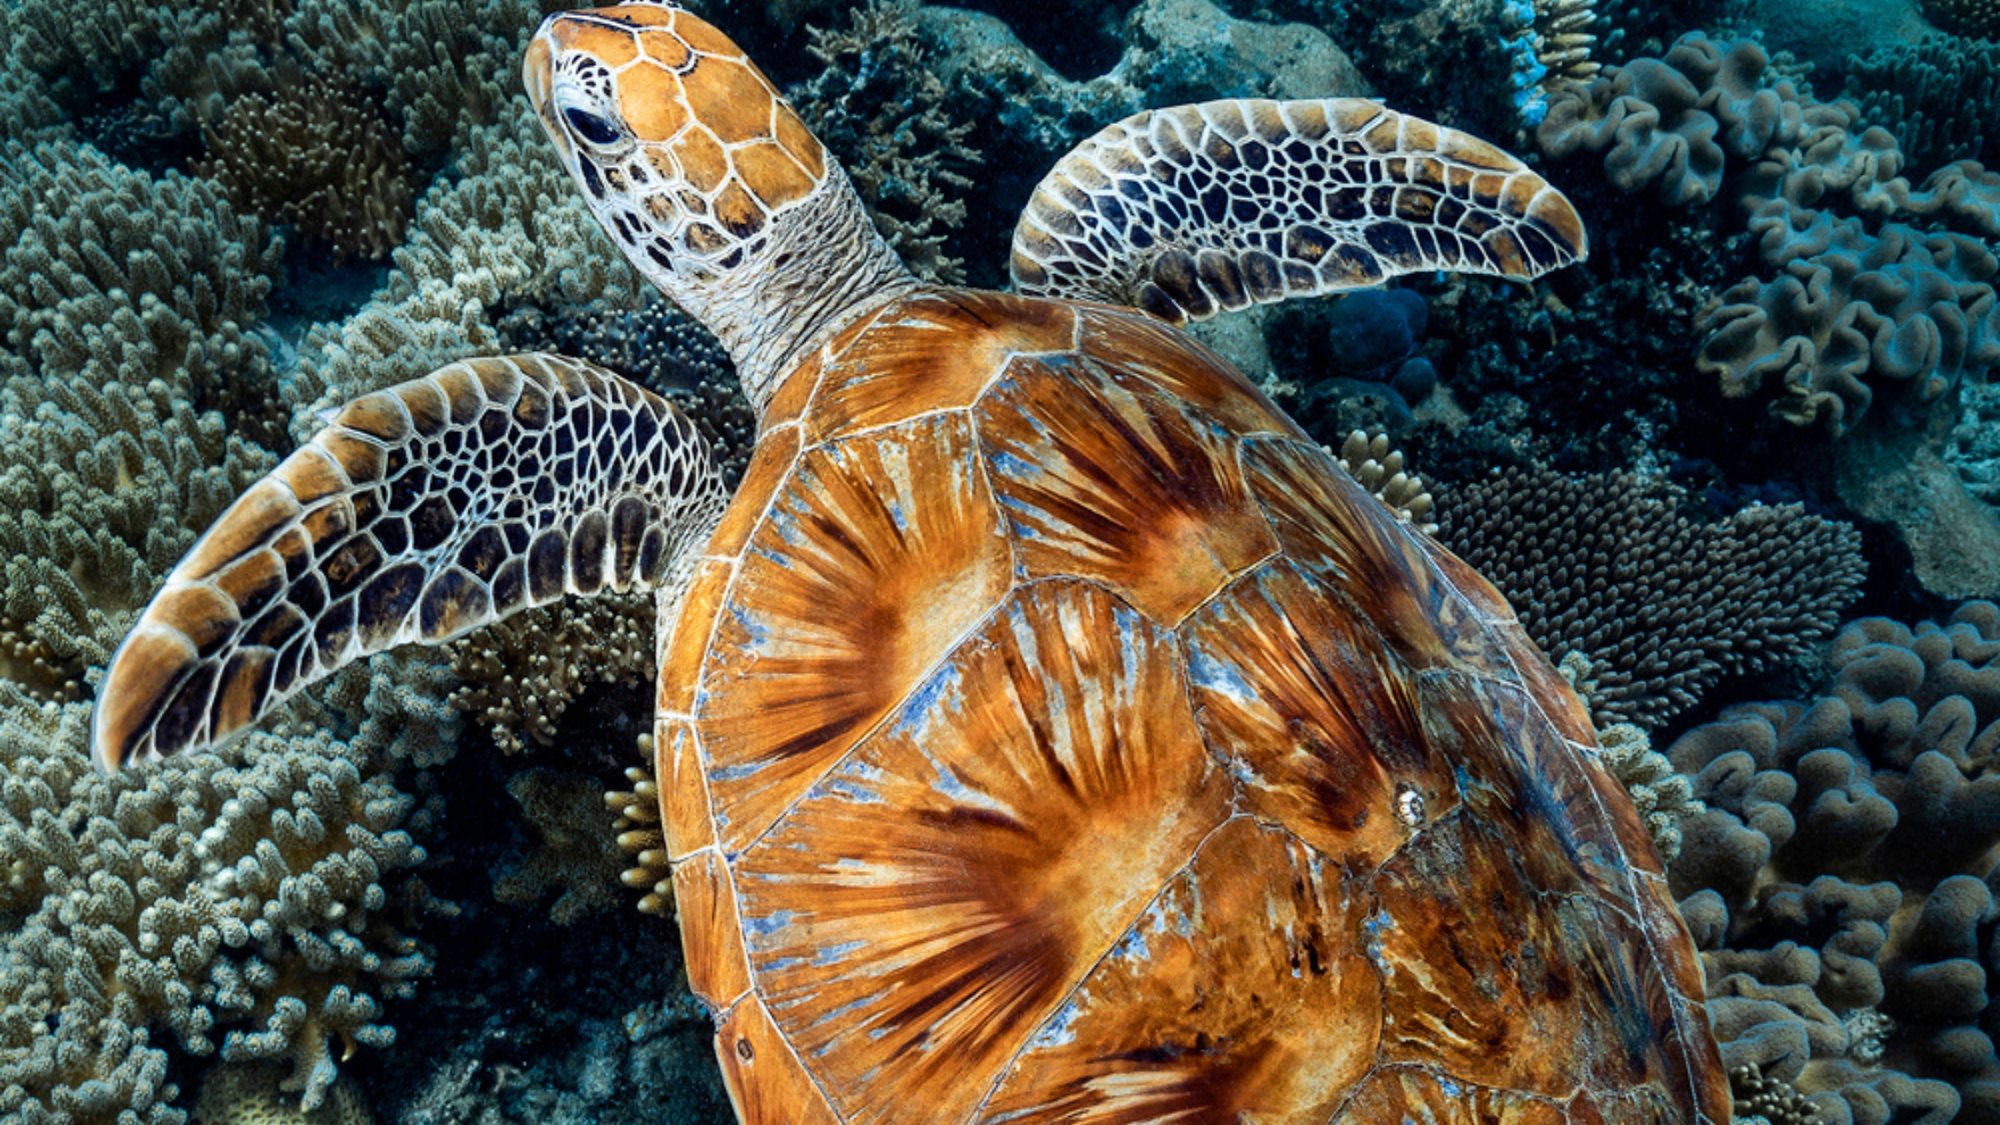 The Most Beautiful Turtle shell. Introducing 'Striker'